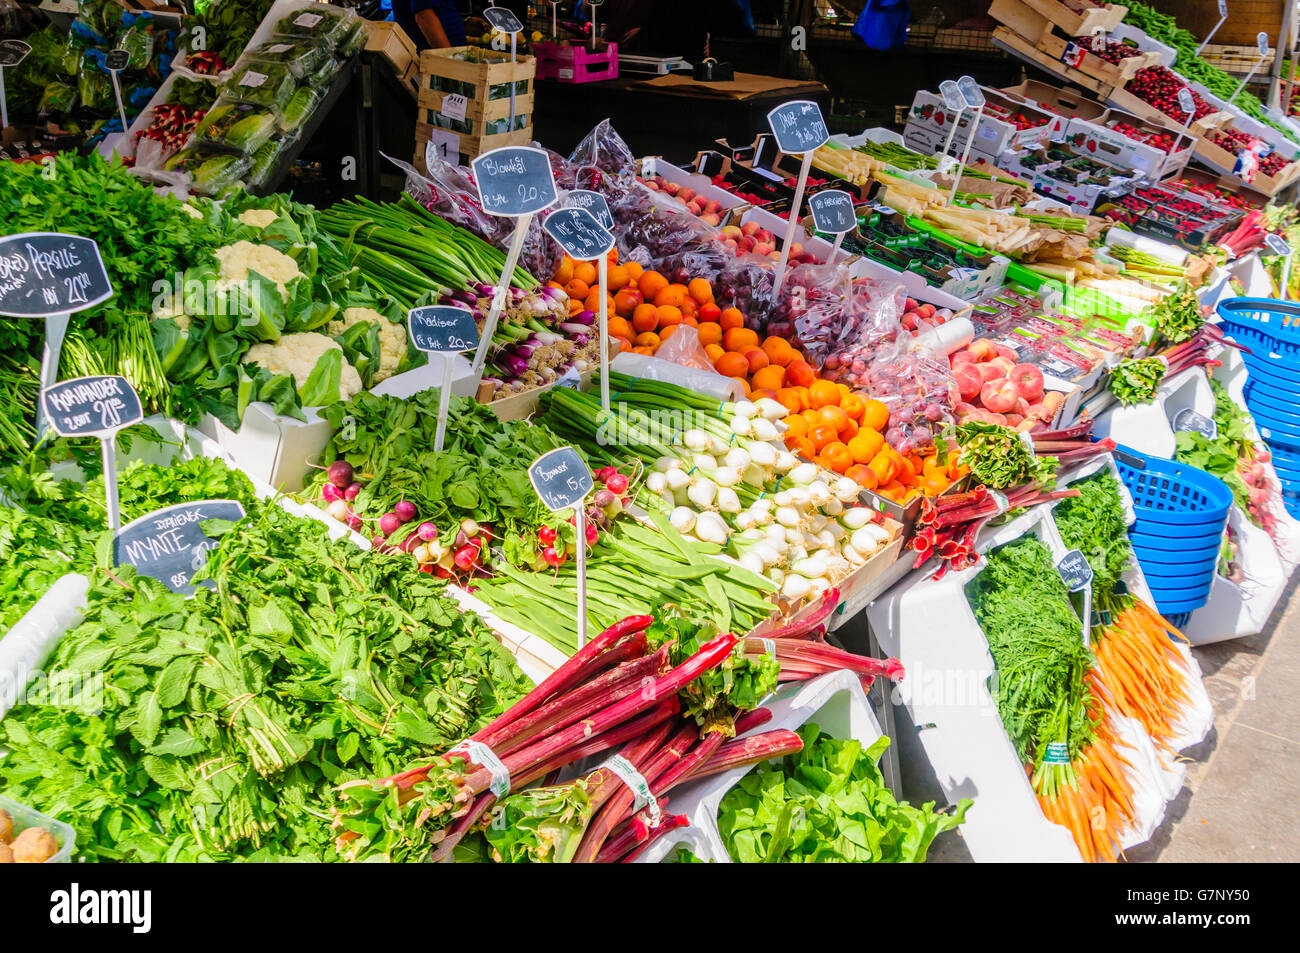 Salad vegetables, cauliflower and herbs for sale at a Danish market stall. Stock Photo